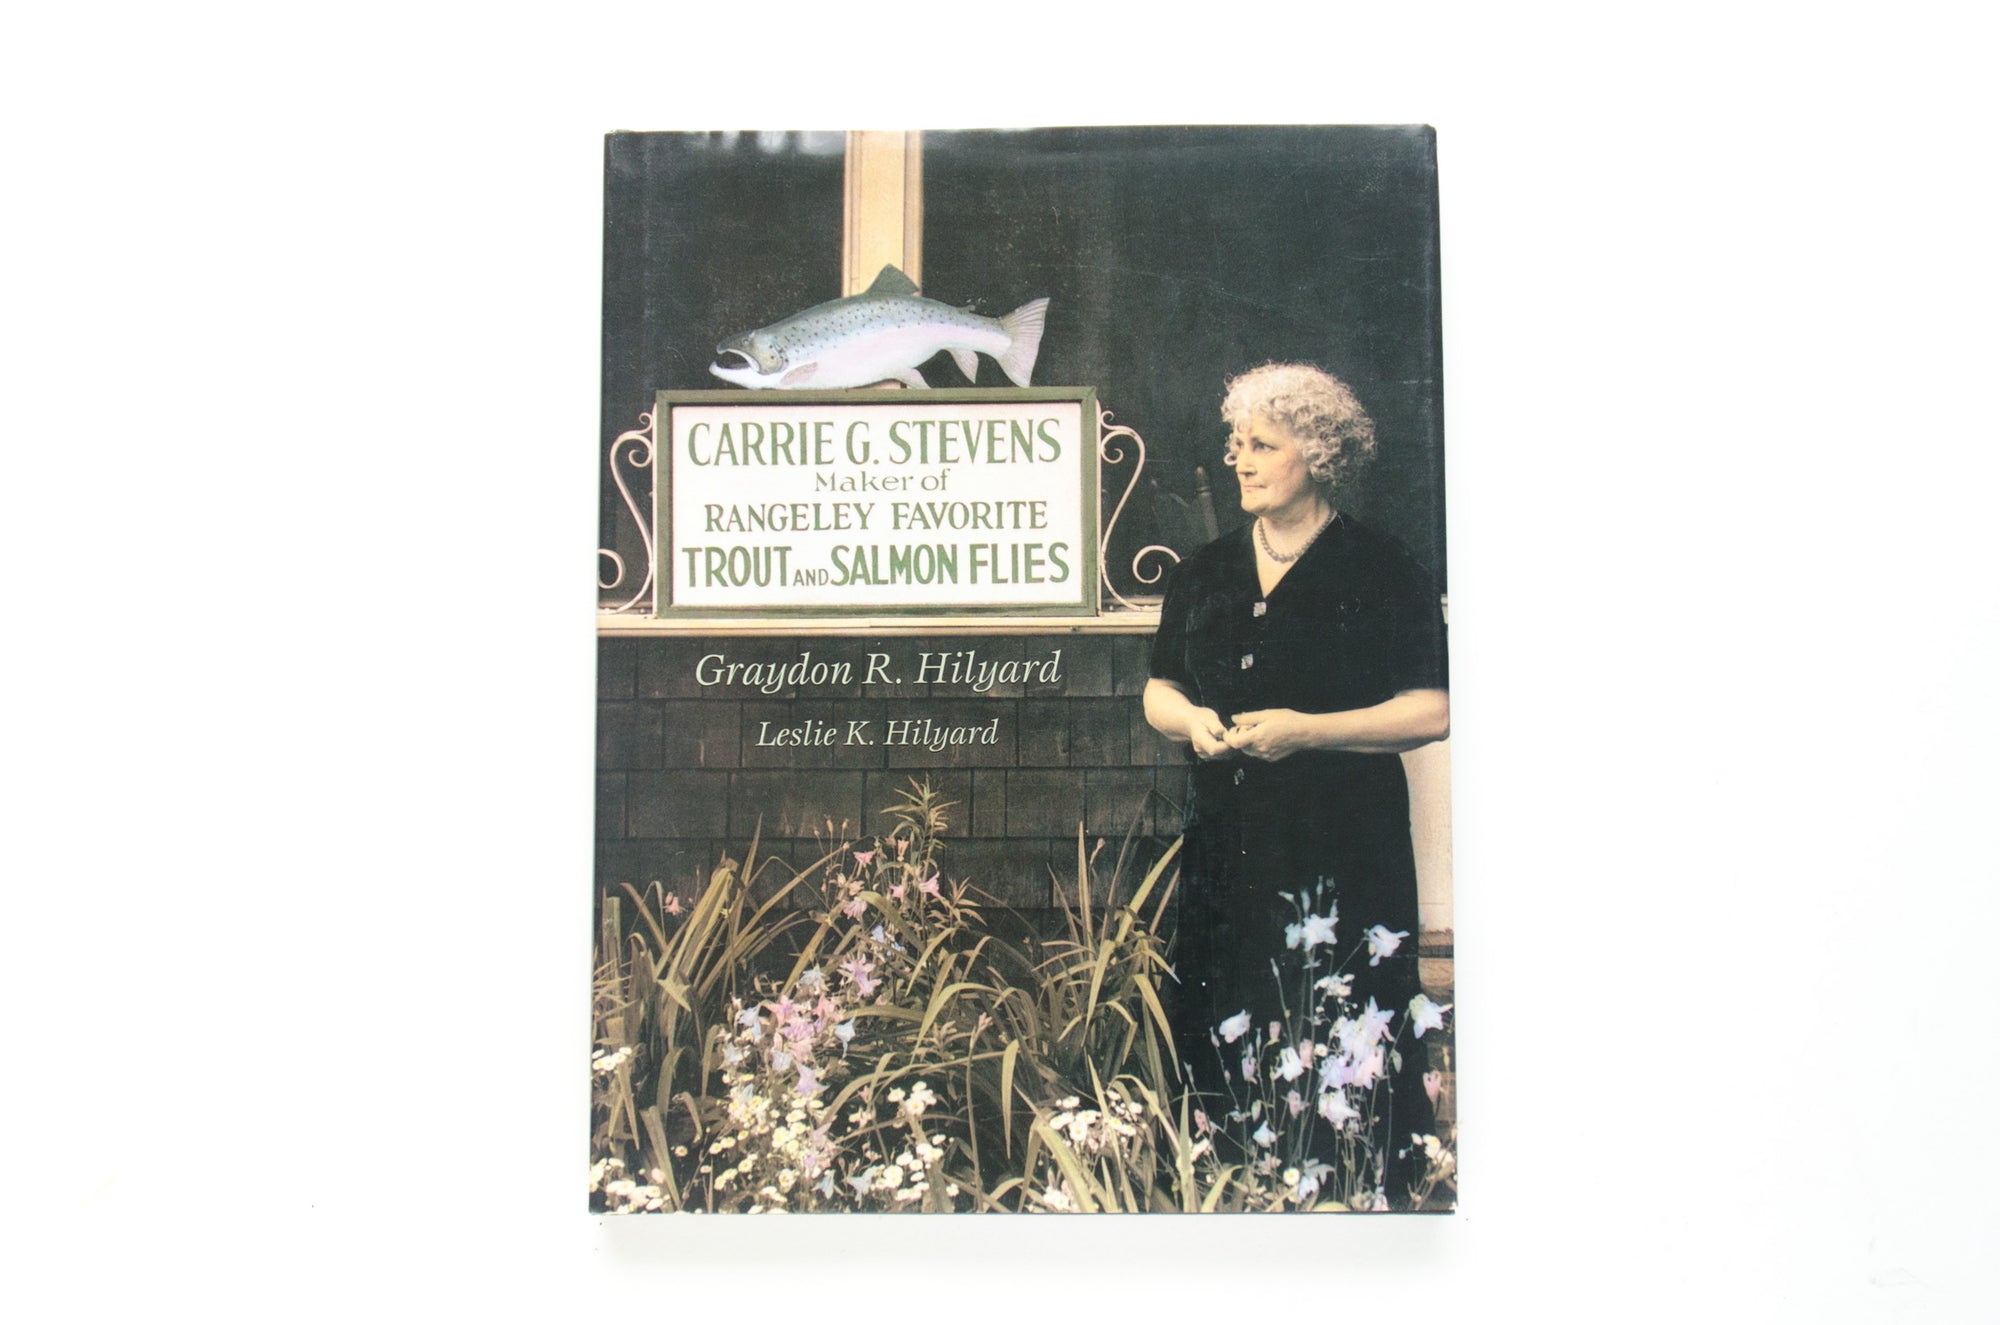 Carrie G. Stevens: Maker of Rangeley Favorite Trout and Salmon Flies